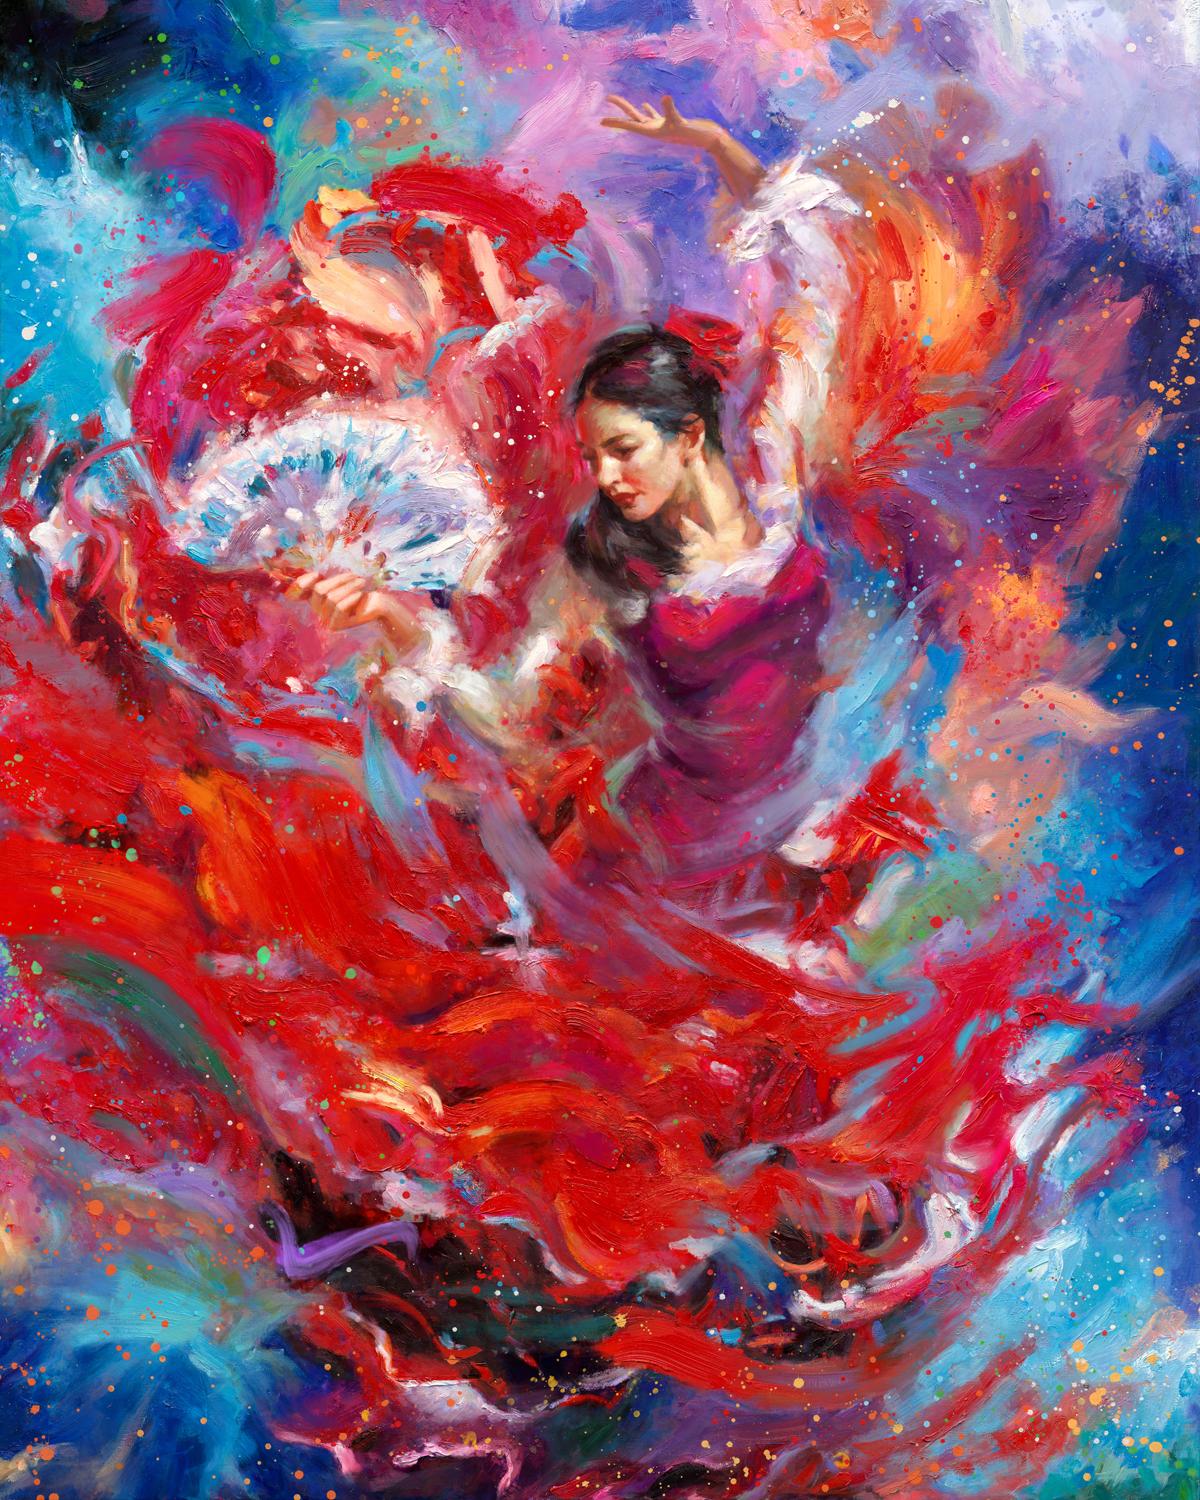 One of a kind painting done by Blend Cota of a Flamenco dancer in vivid colors.
Title : Flamenco